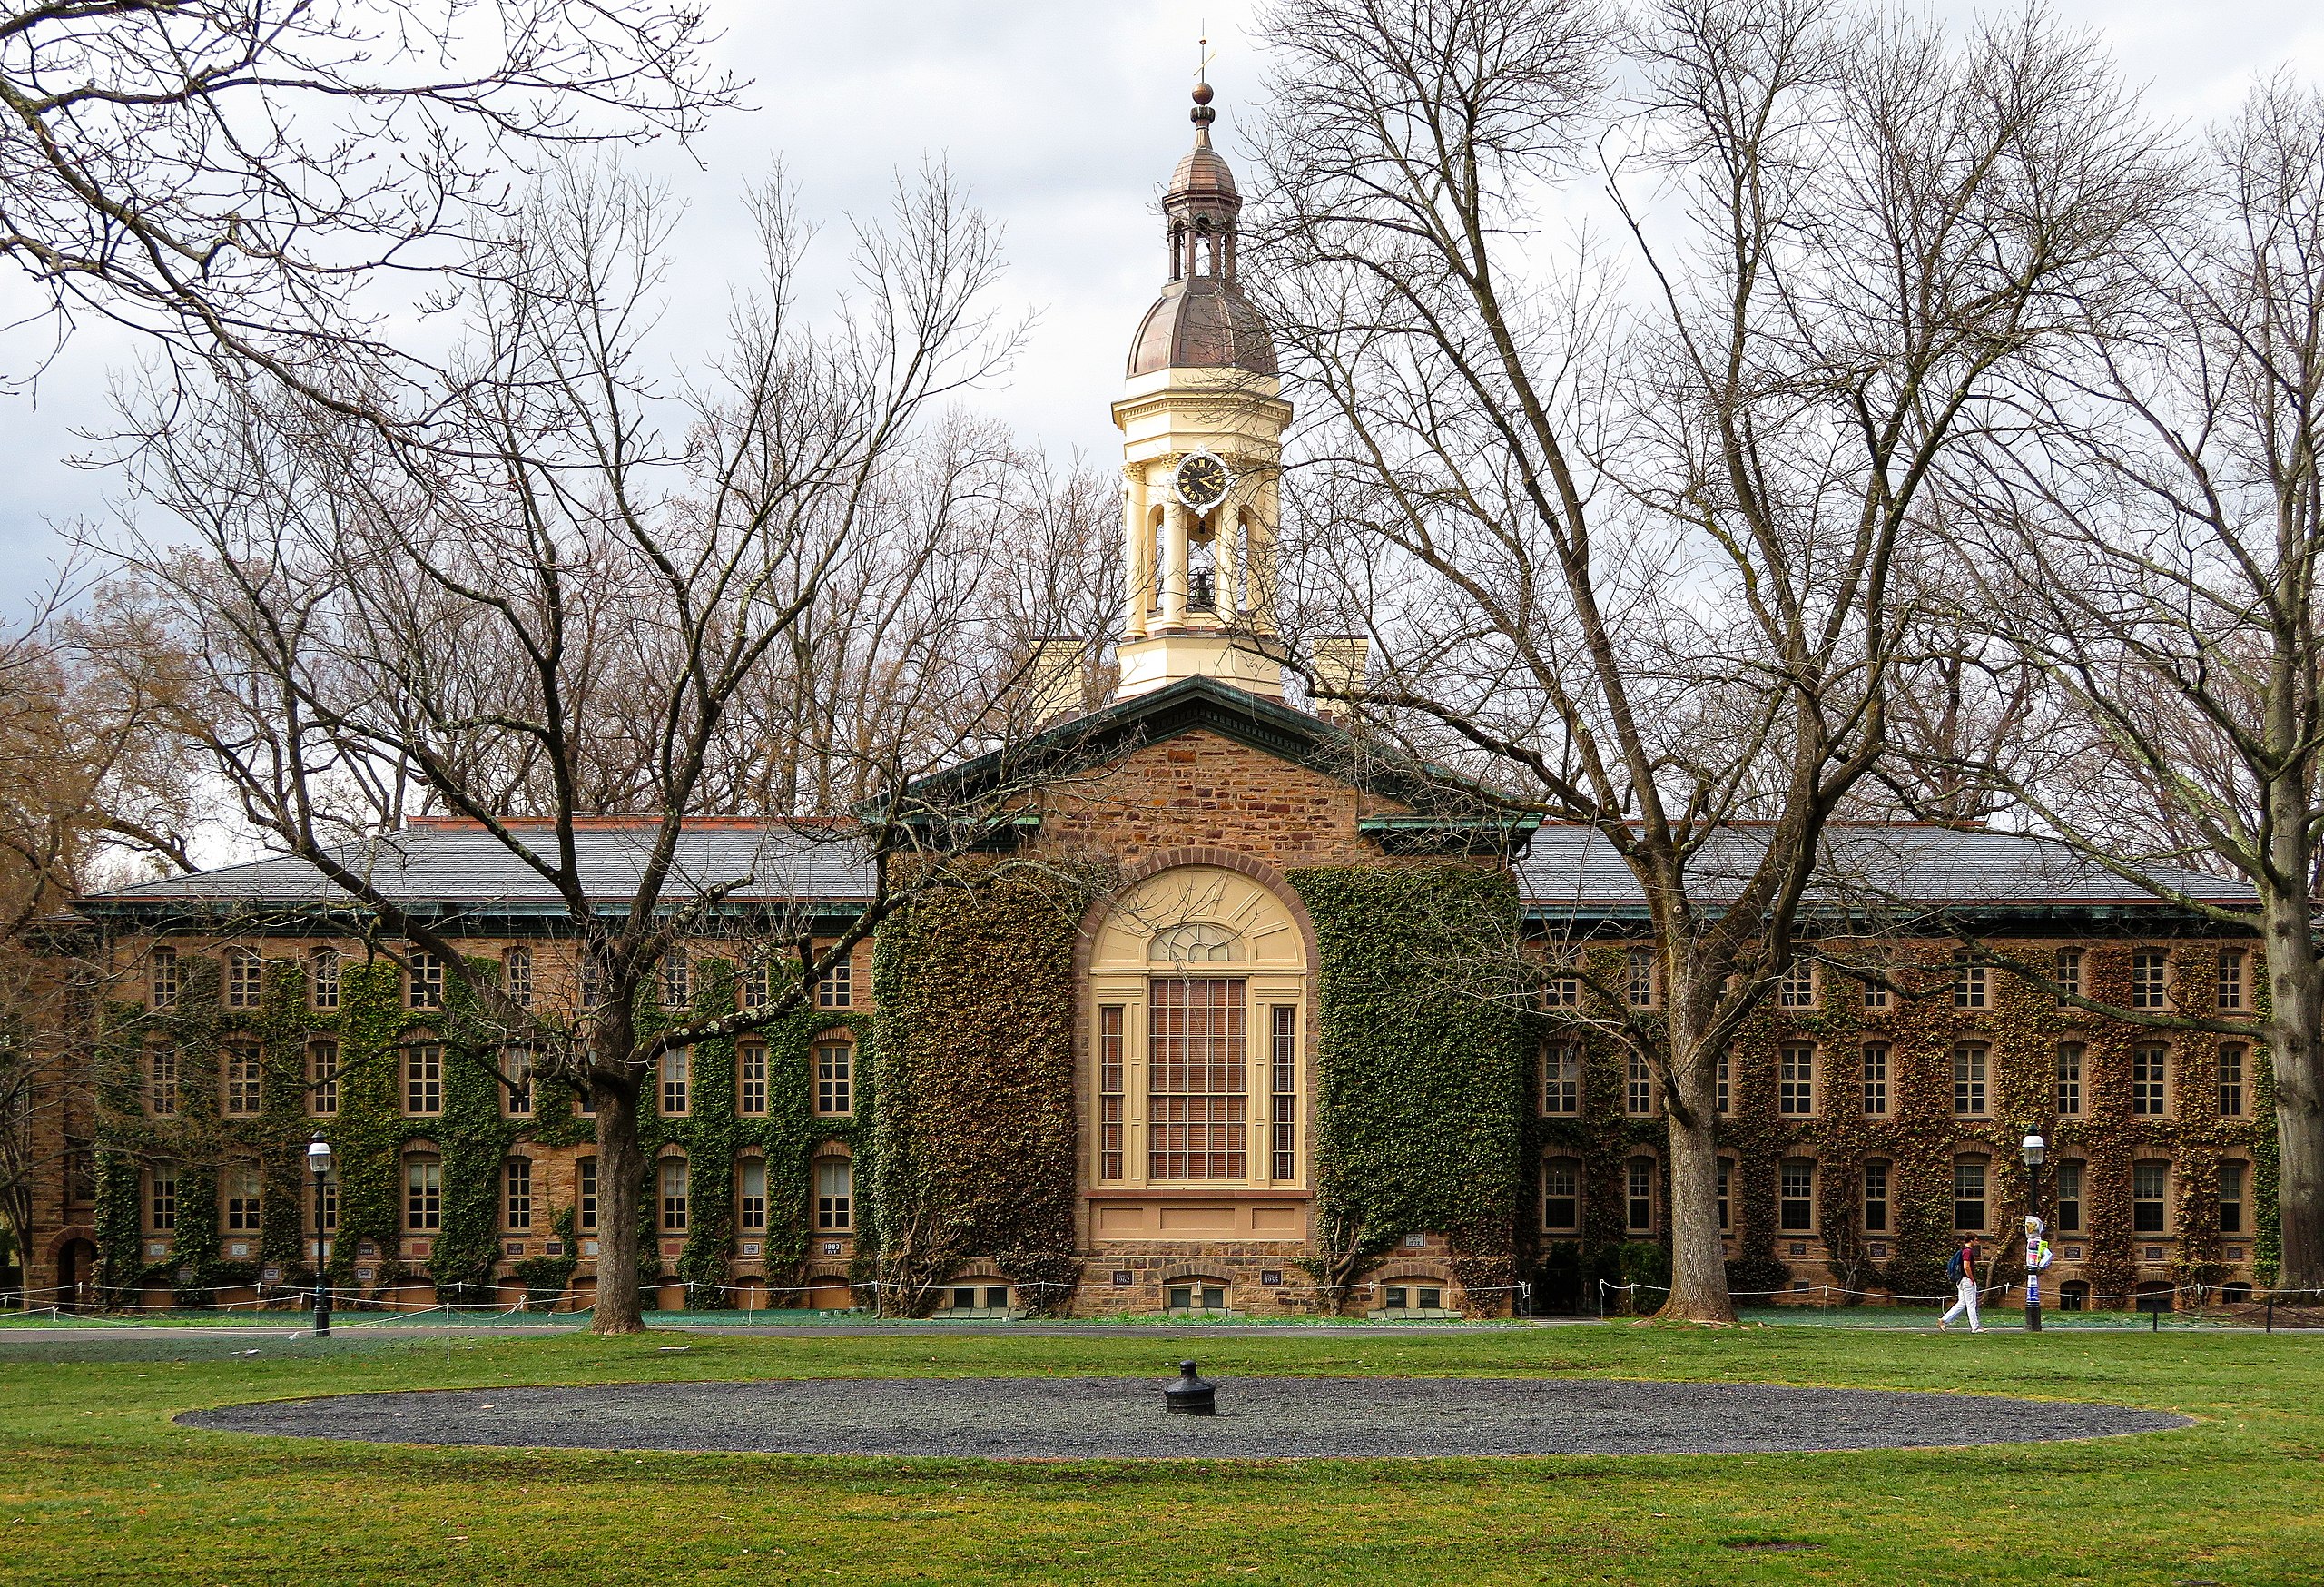 Princeton University's oldest building and former capitol of the United States.